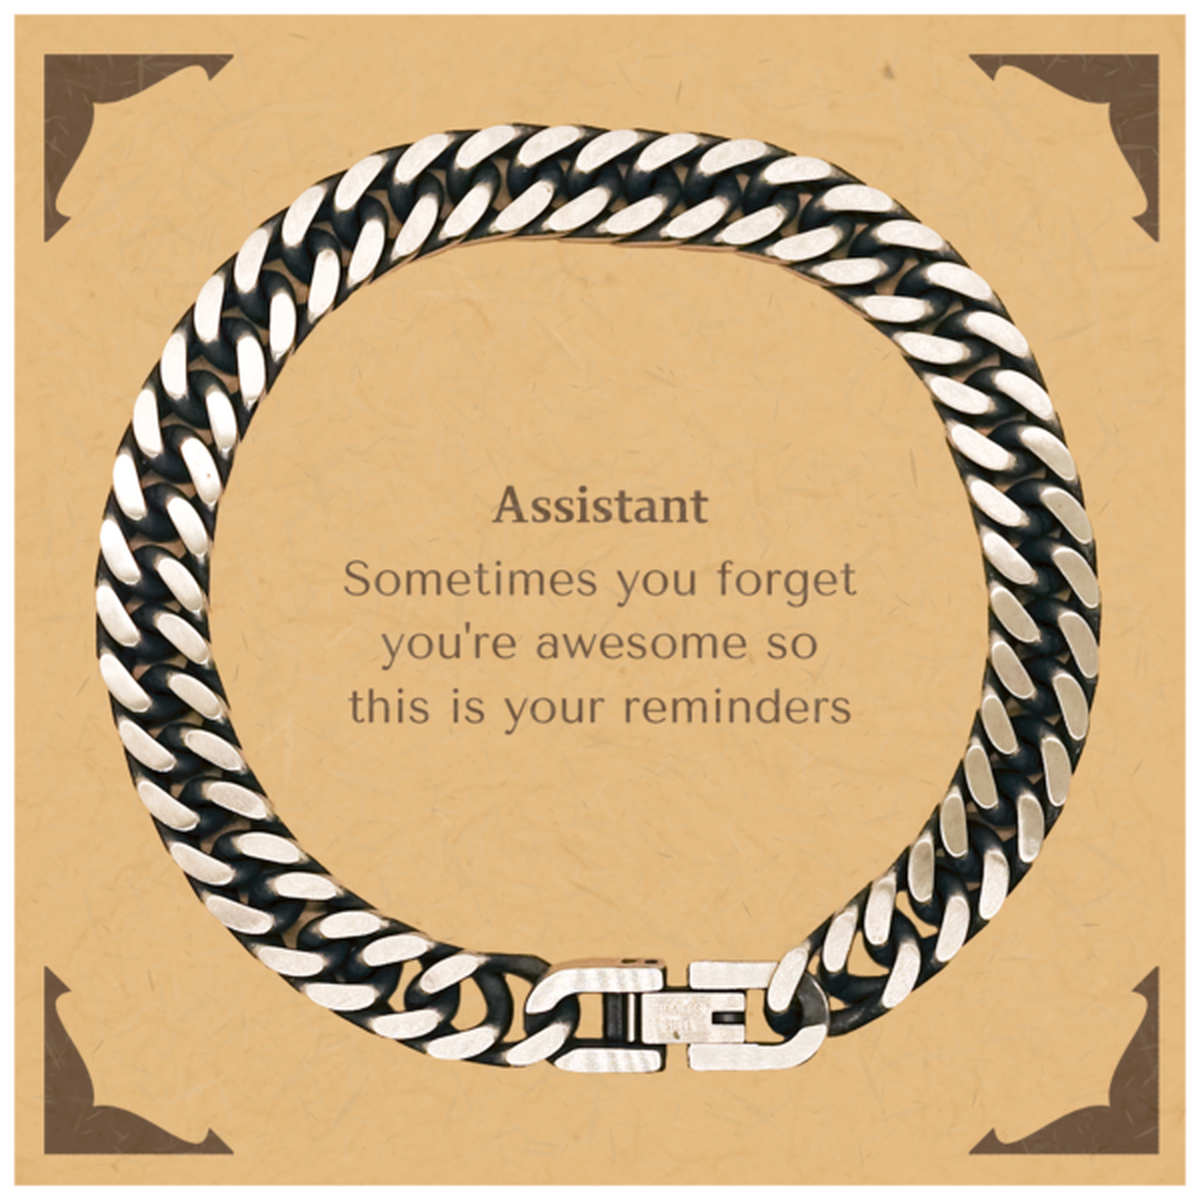 Sentimental Assistant Cuban Link Chain Bracelet, Assistant Sometimes you forget you're awesome so this is your reminders, Graduation Christmas Birthday Gifts for Assistant, Men, Women, Coworkers